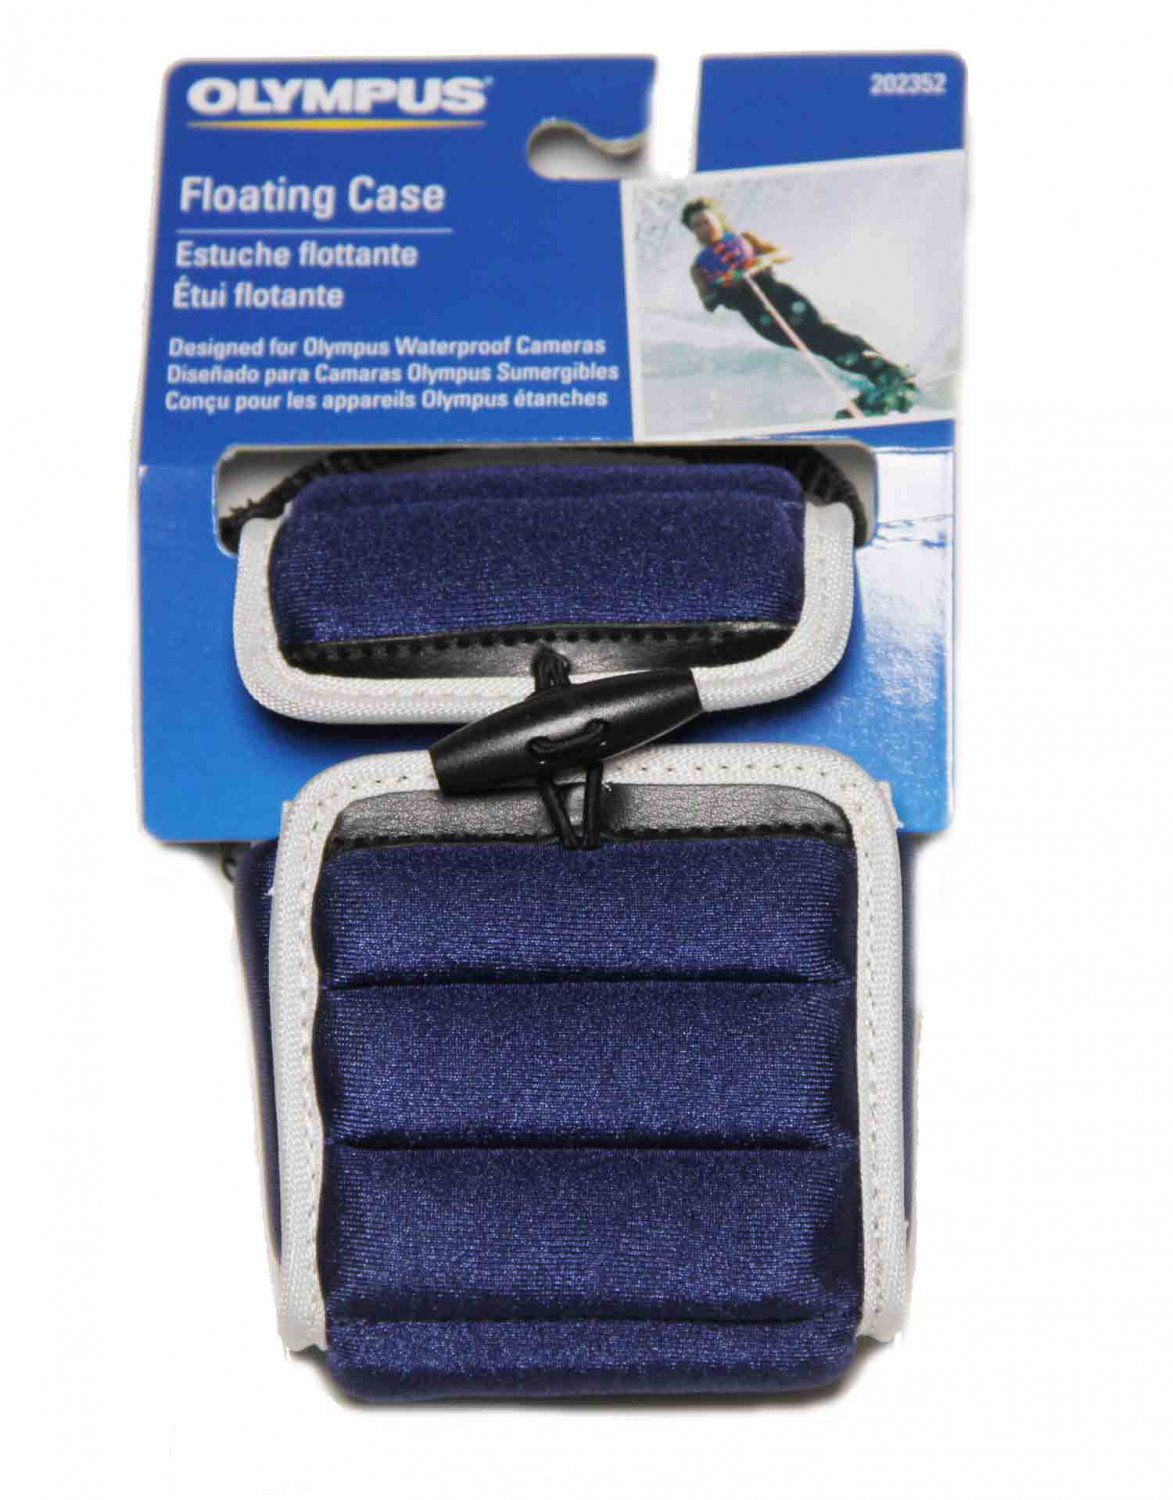 Blue Olympus Float Case for Stylus Tough and SW Series Camera 